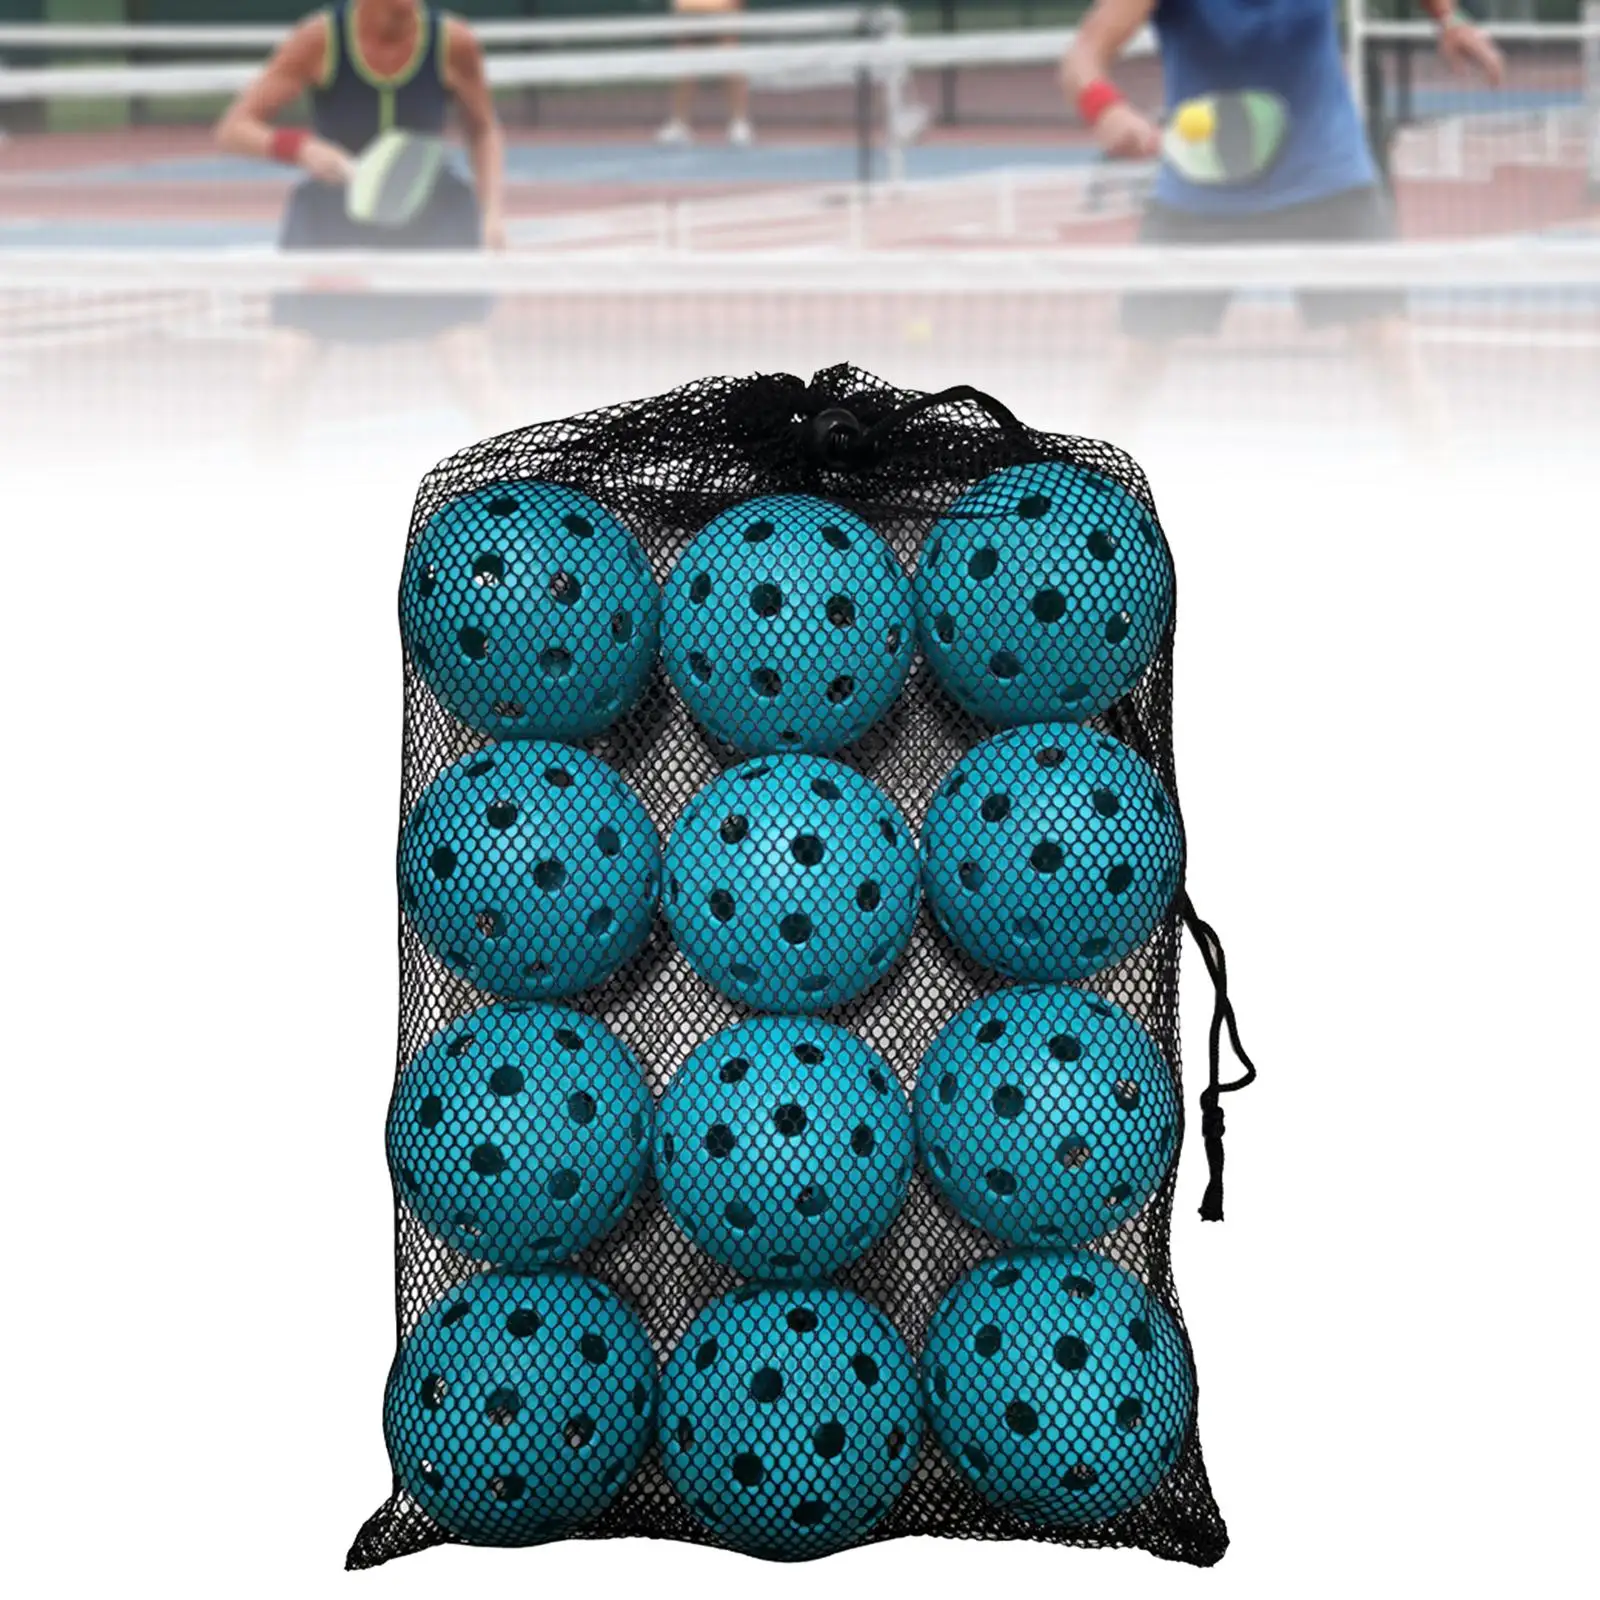 12Pcs Pickleball Balls Specifically Designed Durable Hollow Ball Professional Quality Devices for Tournament Play Indoor Outdoor